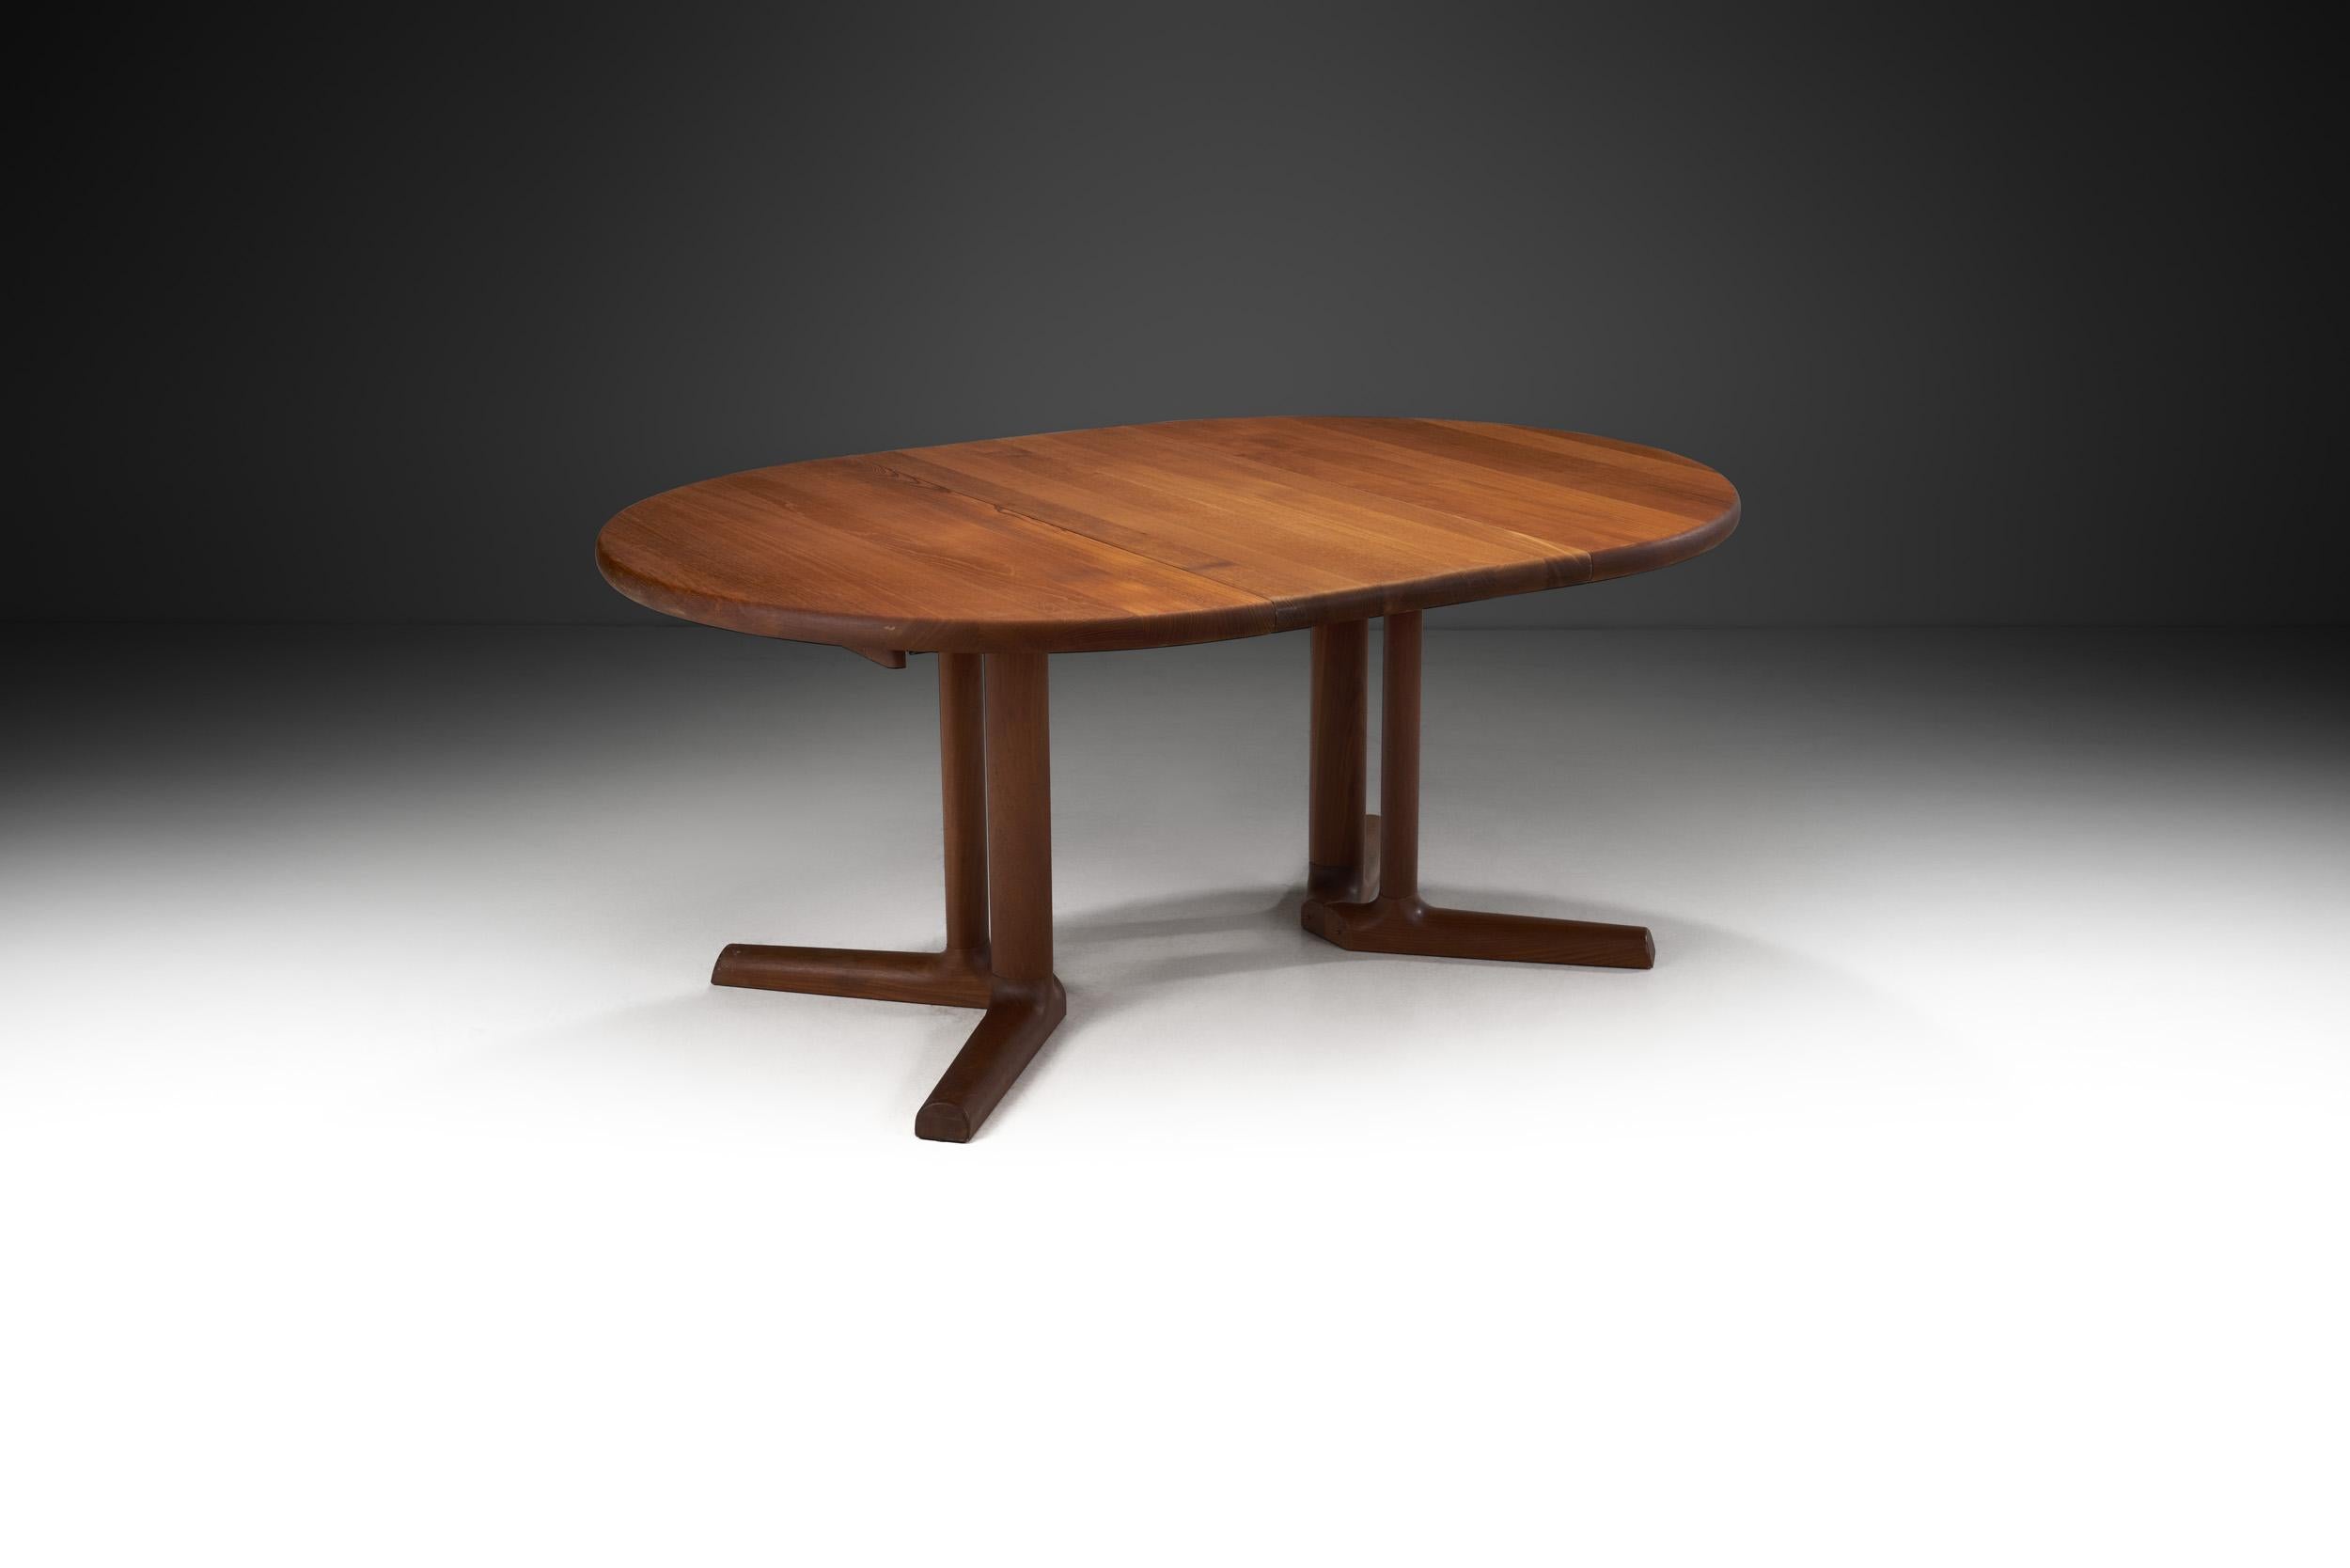 Precious woods and hand finishing define the furniture pieces made by the Danish company, Dyrlund. As this stunning solid teak table shows, great emphasis is placed on skilled craftsmanship with experts who work in the old craftsmanship